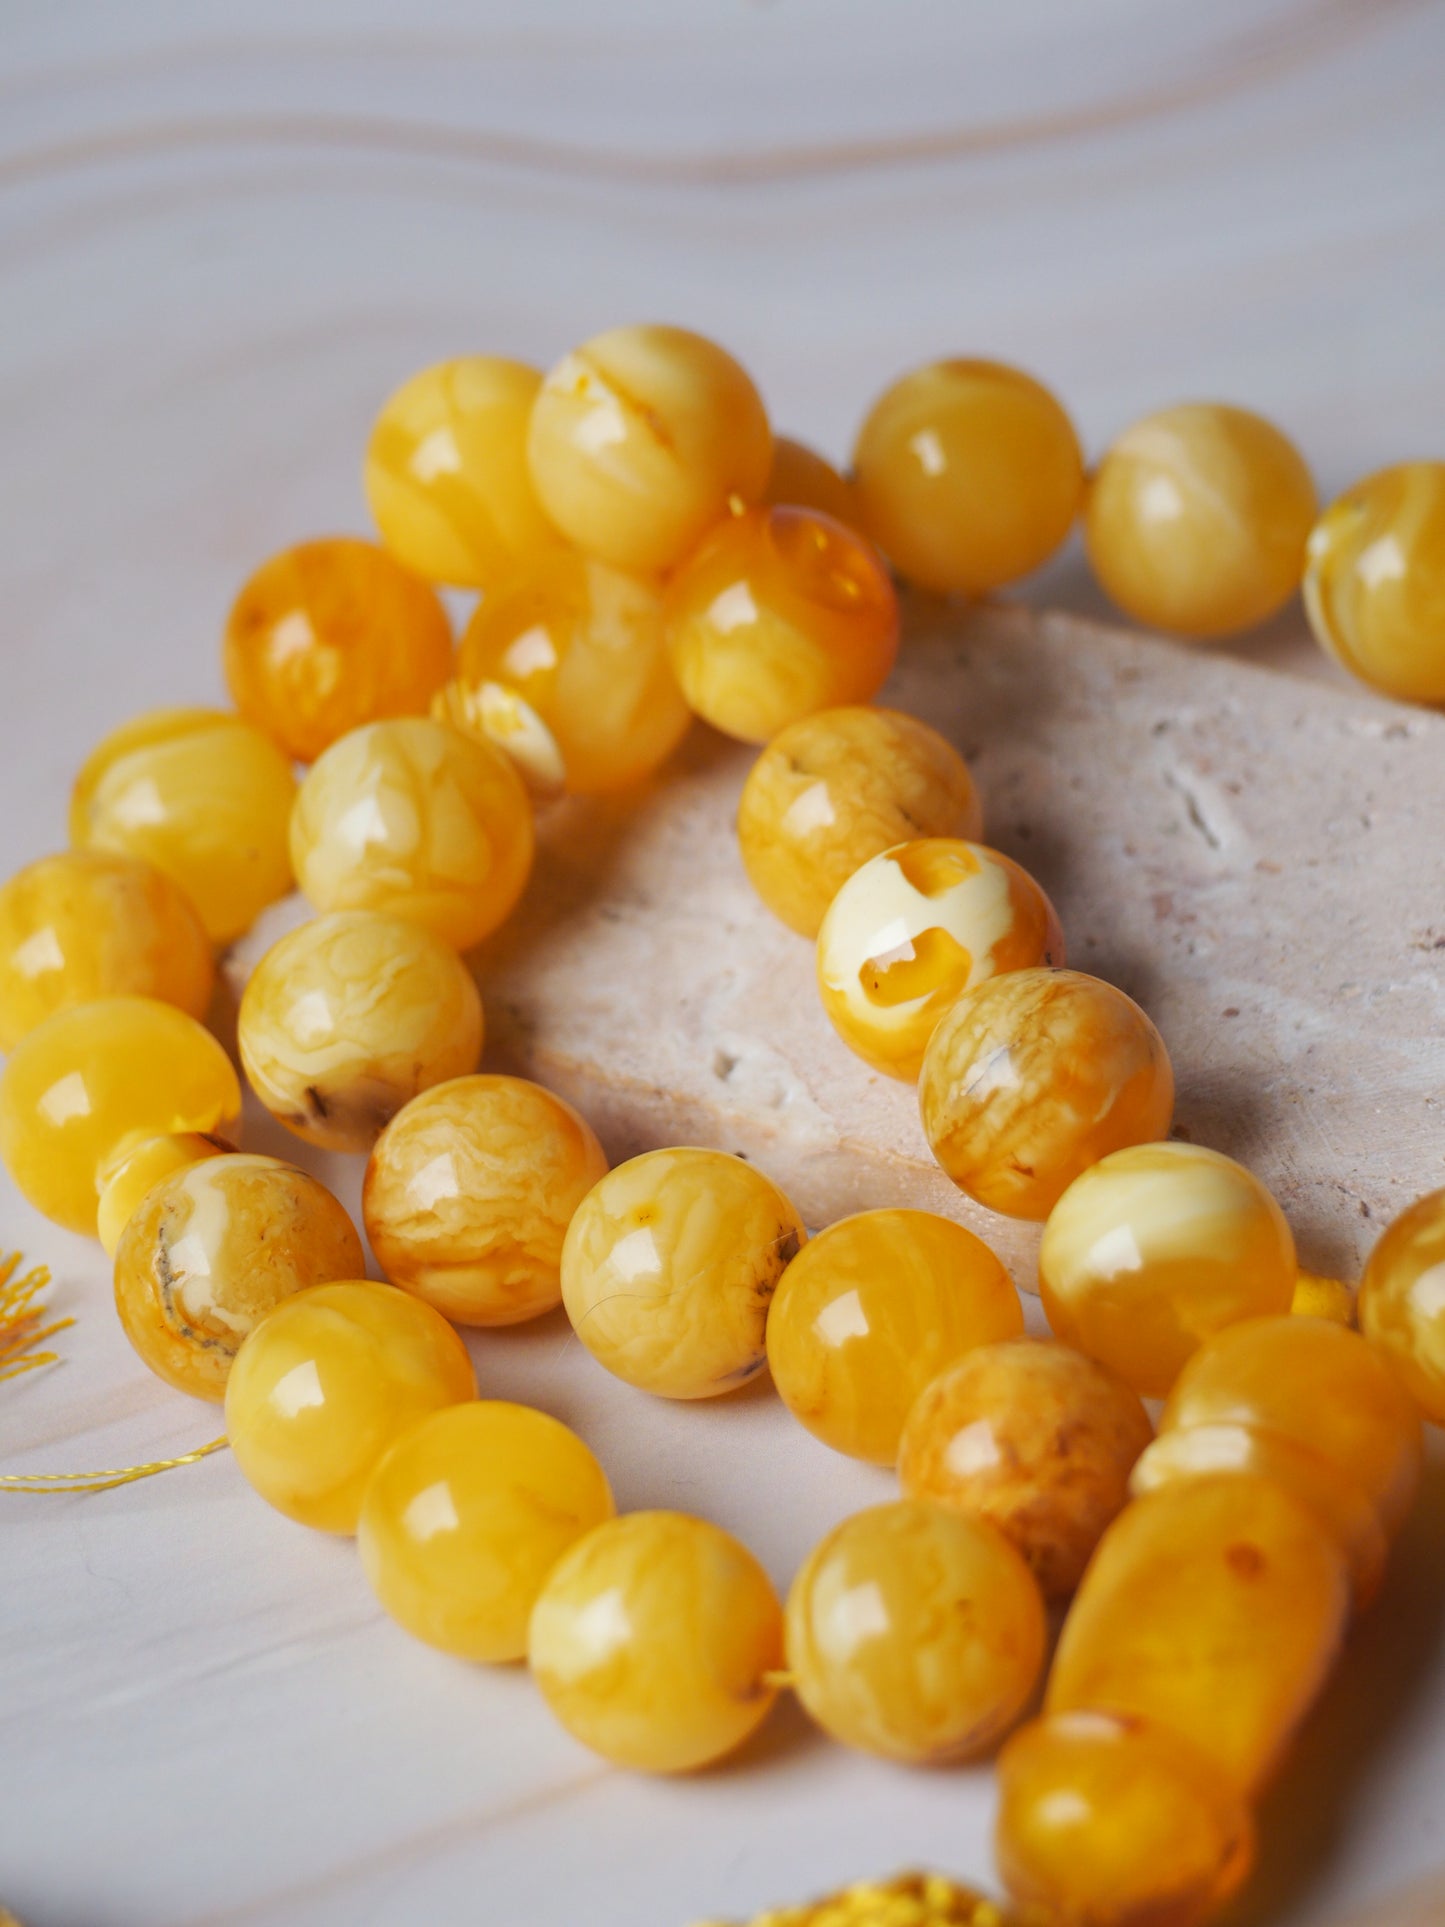 Unique Mozaic Natural Butterscotch/ Honey/ White Amber Rosary Round Beads